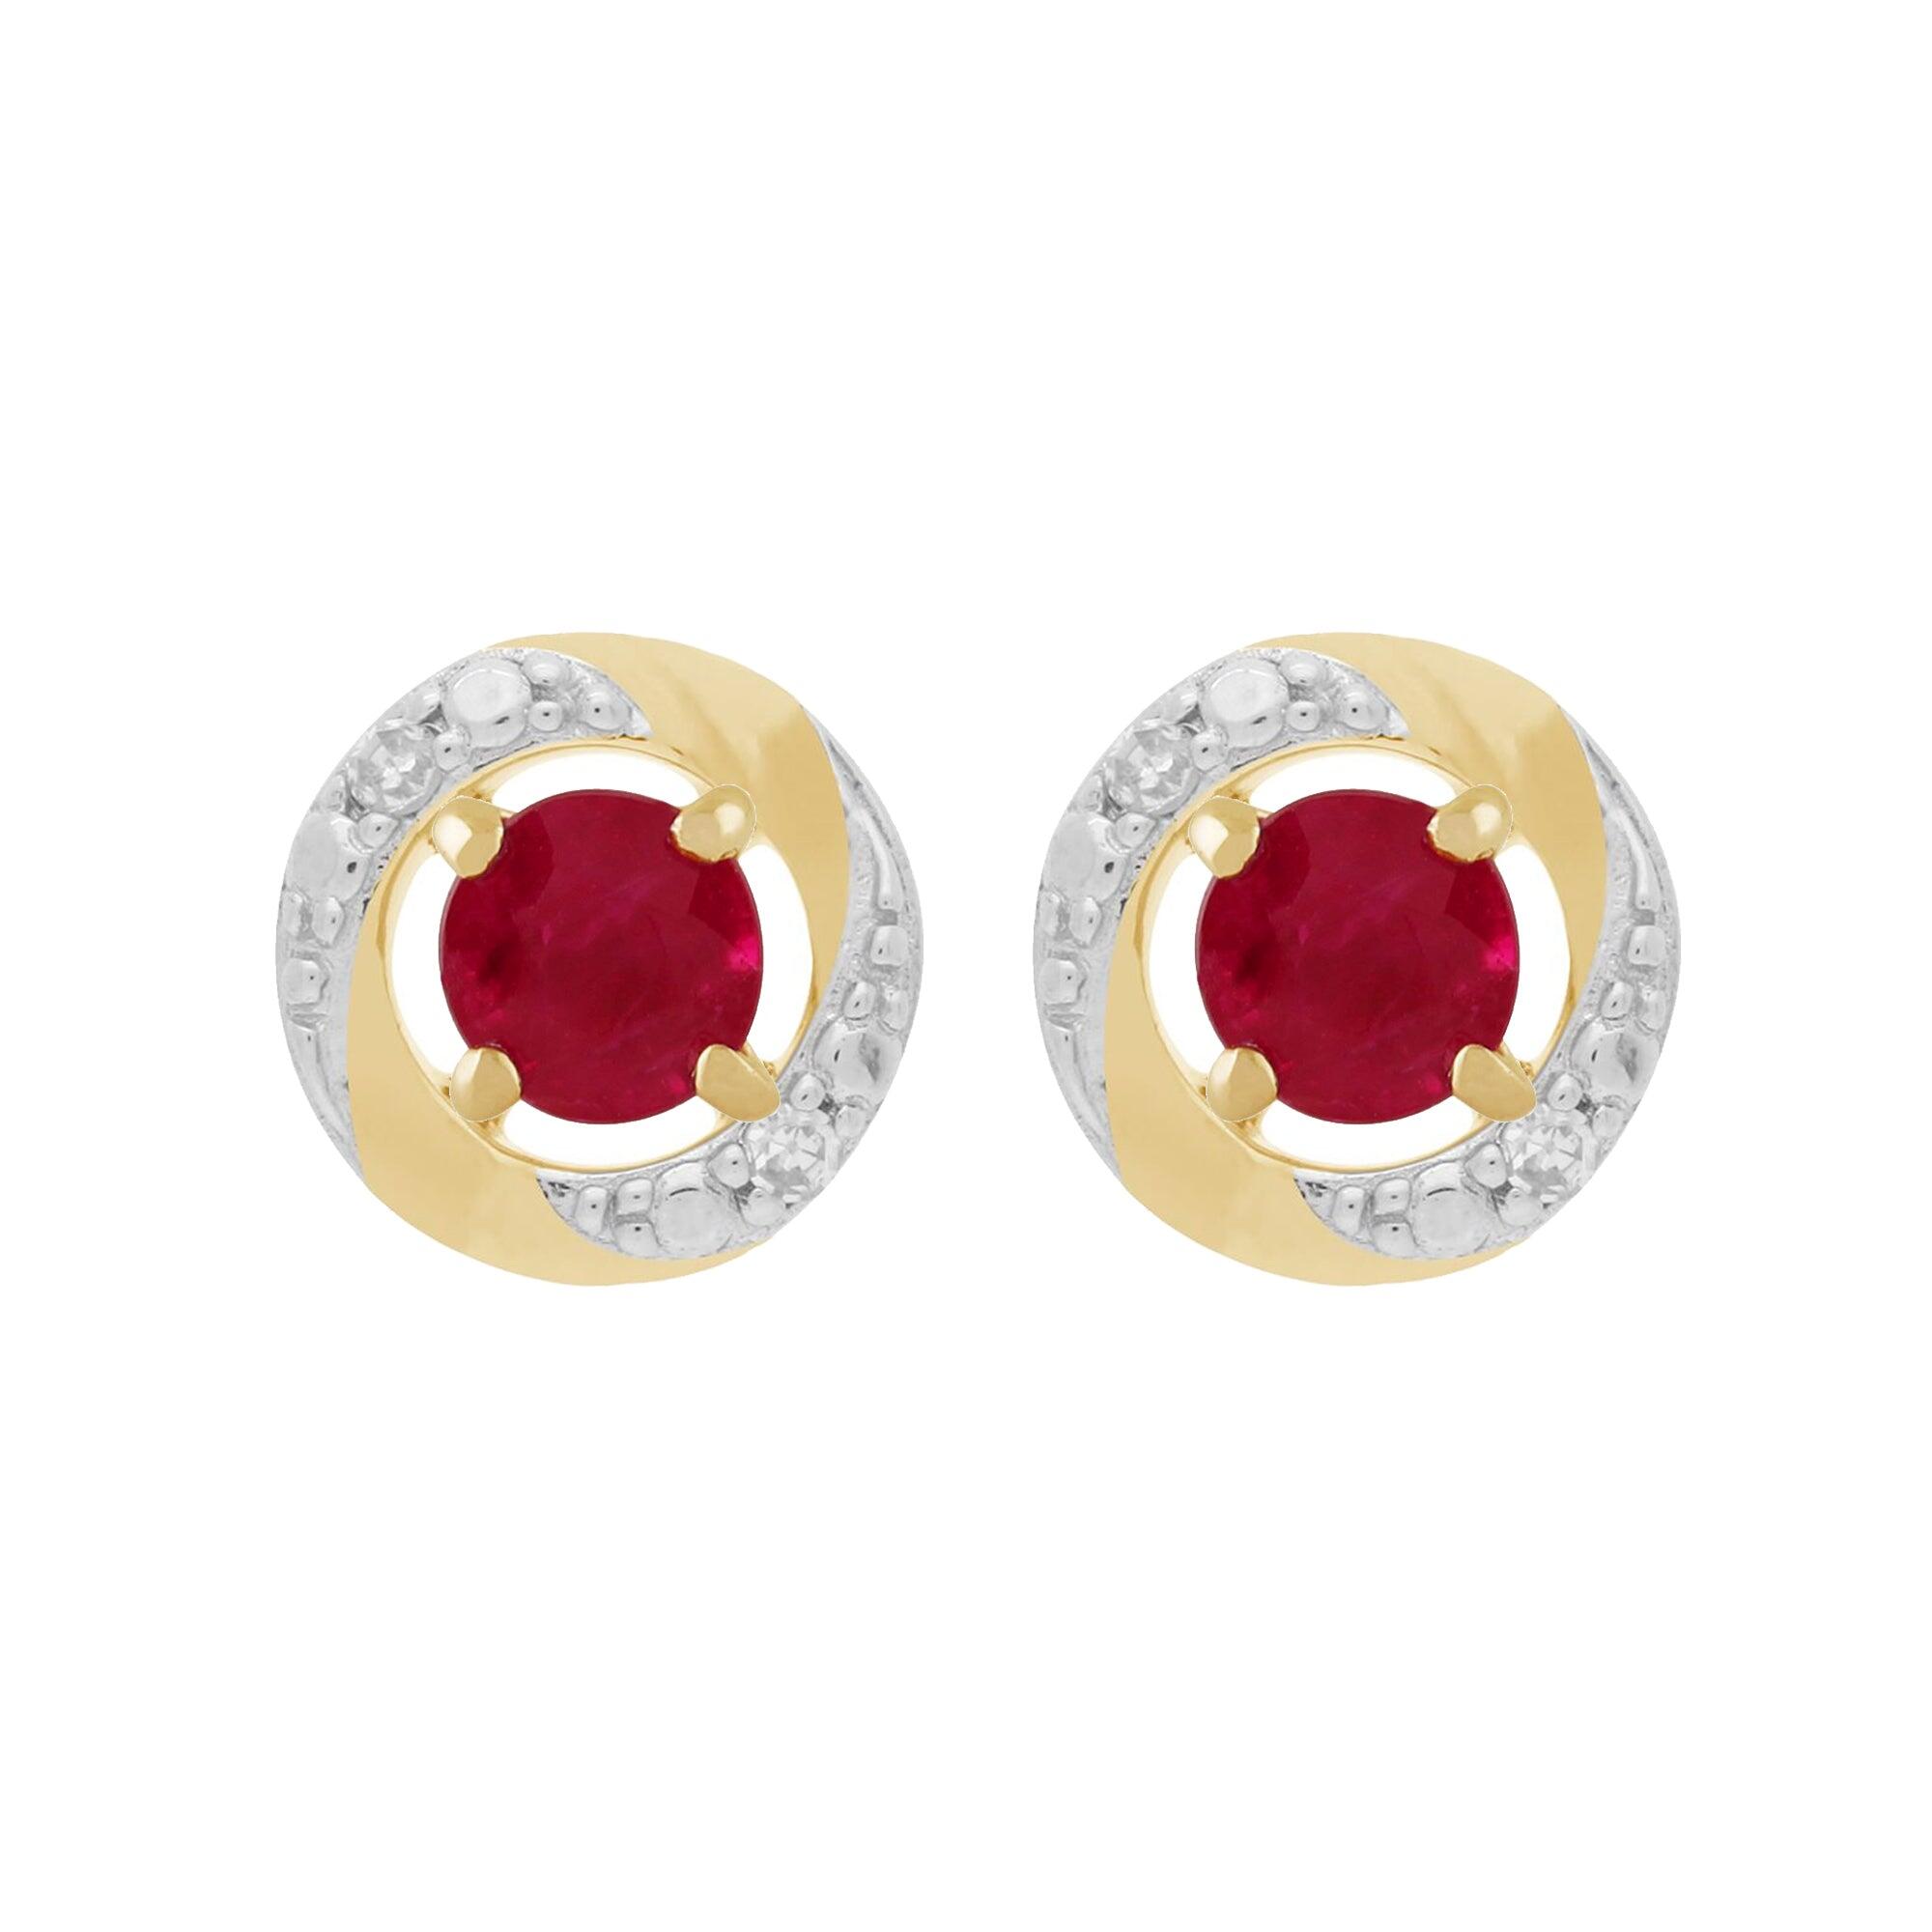 Classic Round Ruby Stud Earrings with Detachable Diamond Halo Ear Jacket in 9ct Yellow Gold